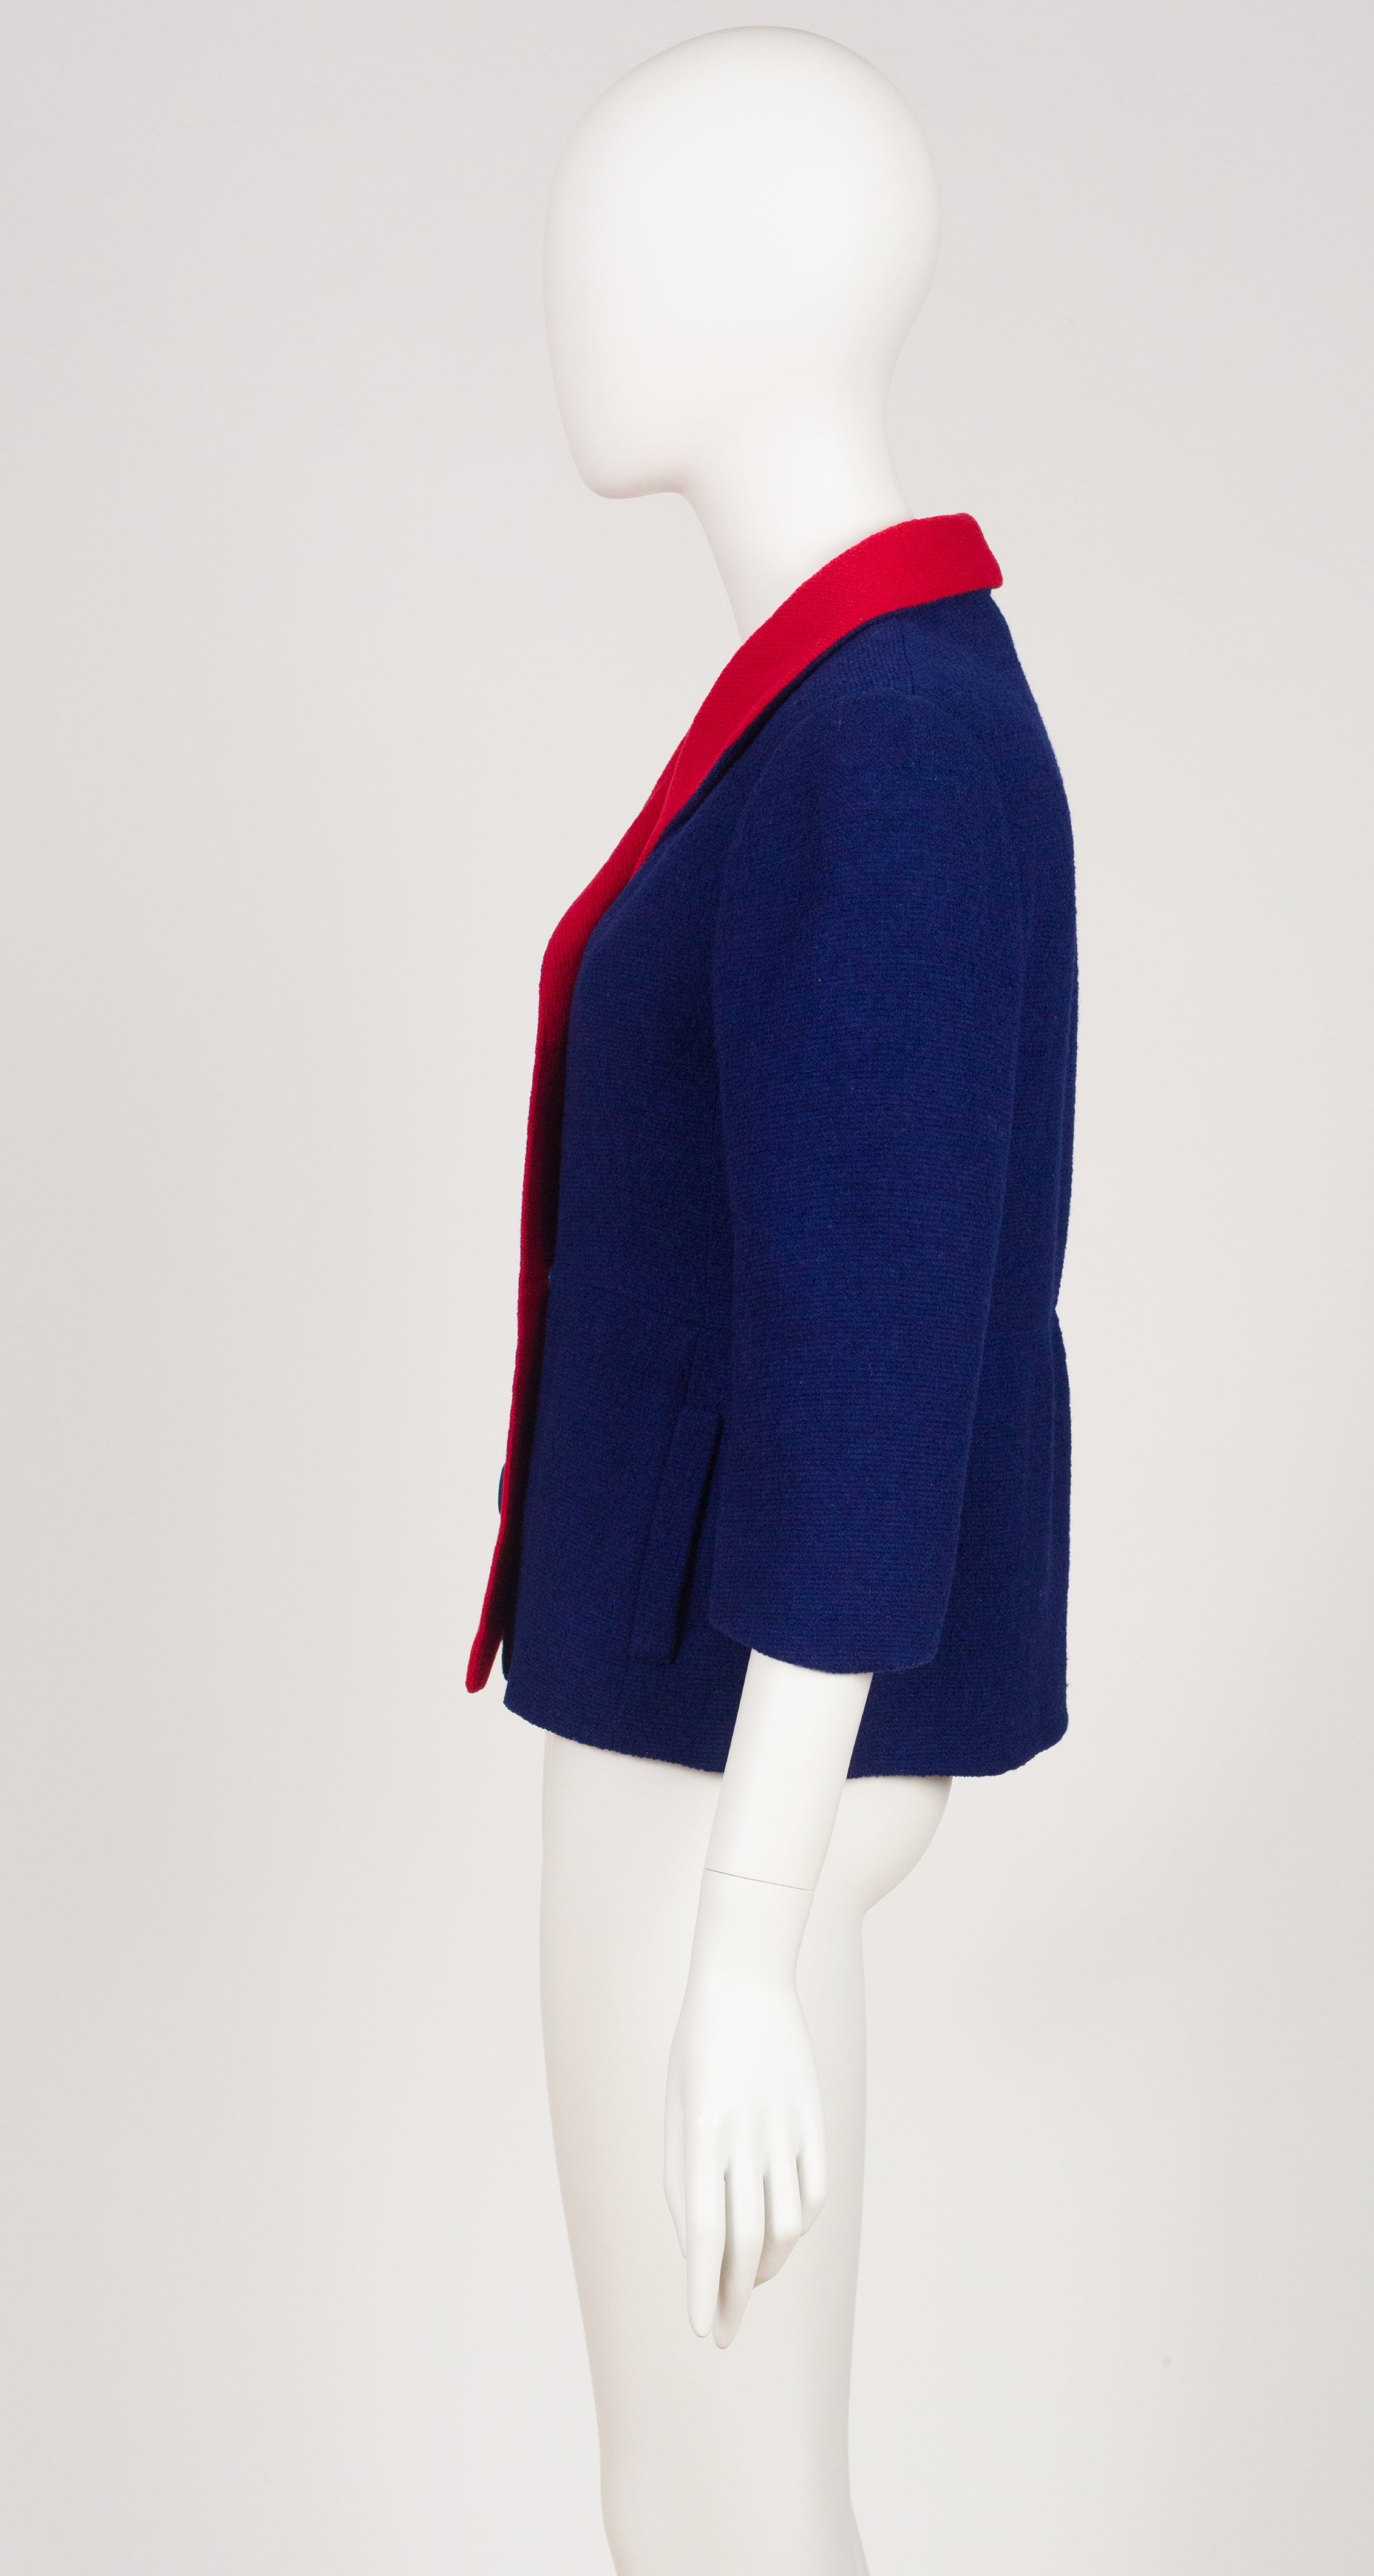 1960s Red & Navy Bouclé Wool Double-Breasted Jacket